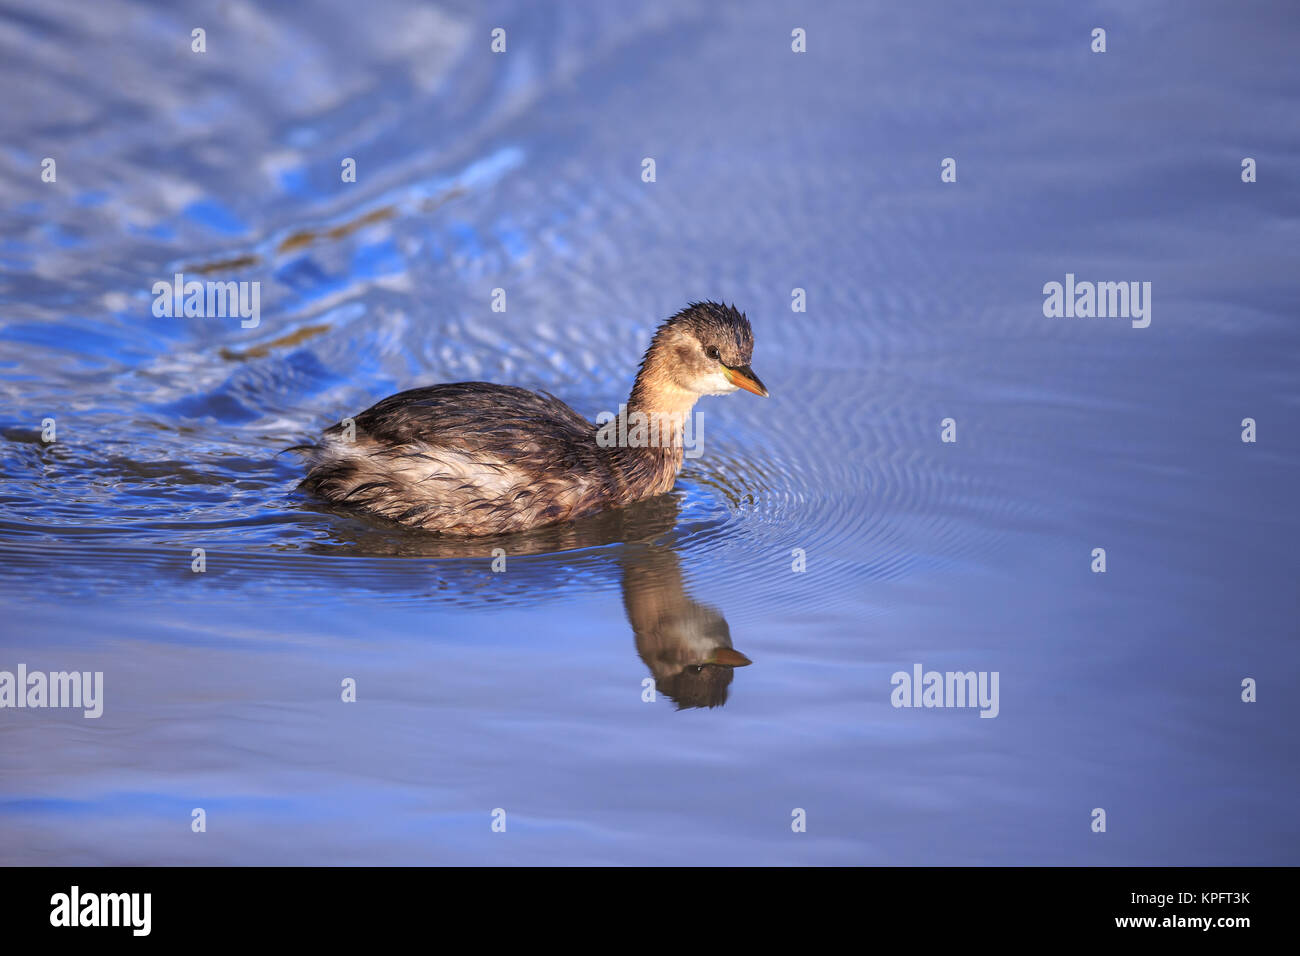 A Little Grebe on blue water Stock Photo